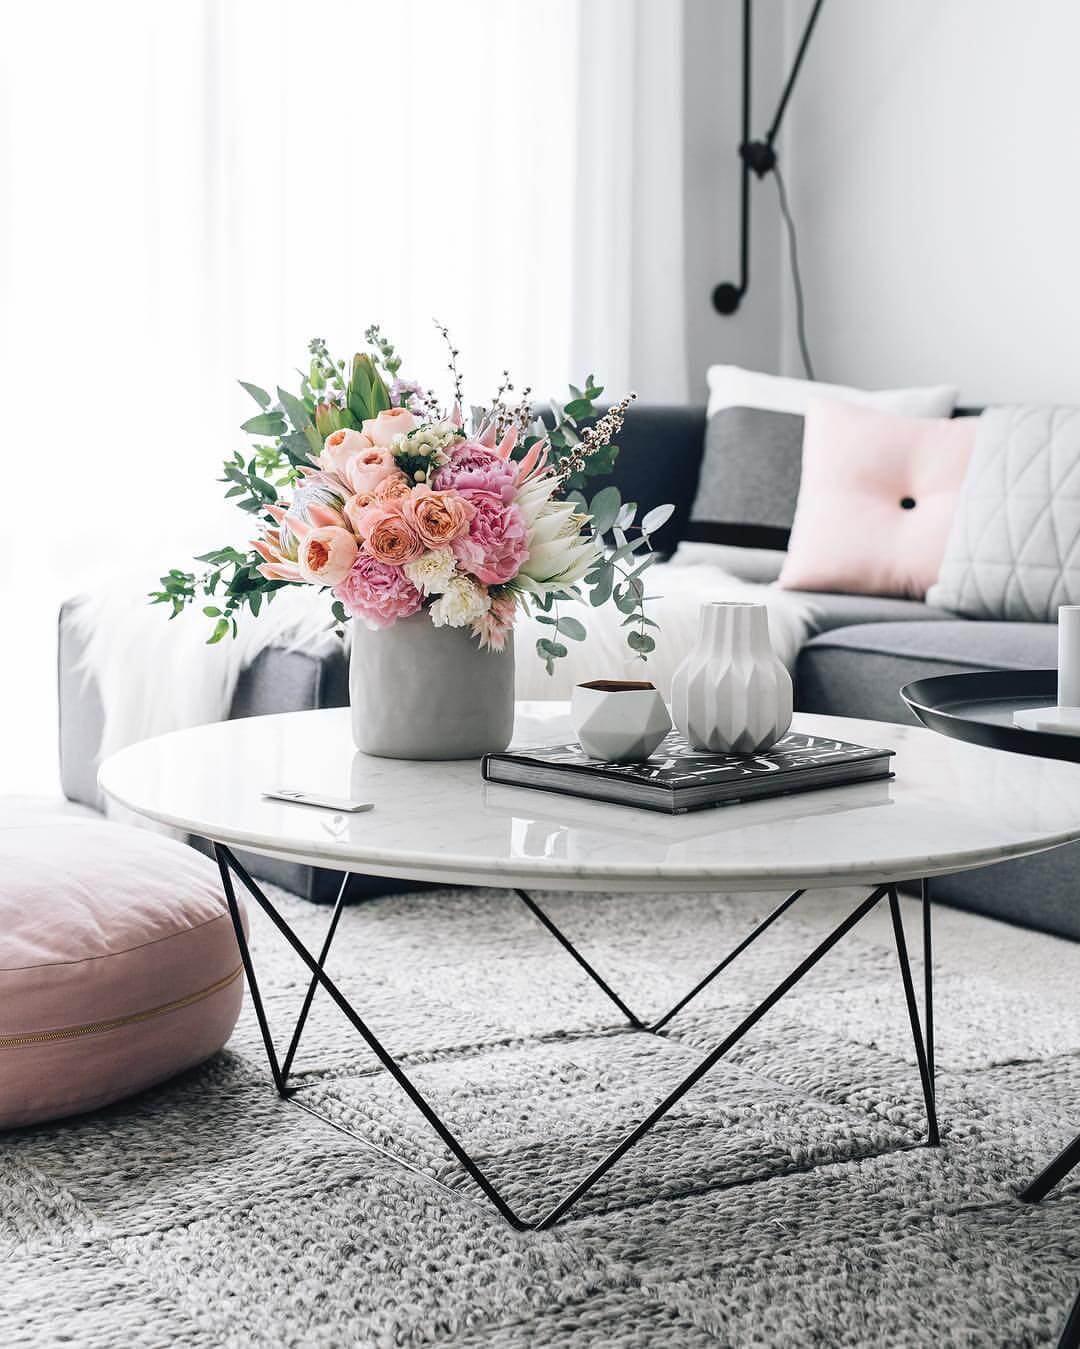 18 Best Coffee Table Decorating Ideas and Designs for 18